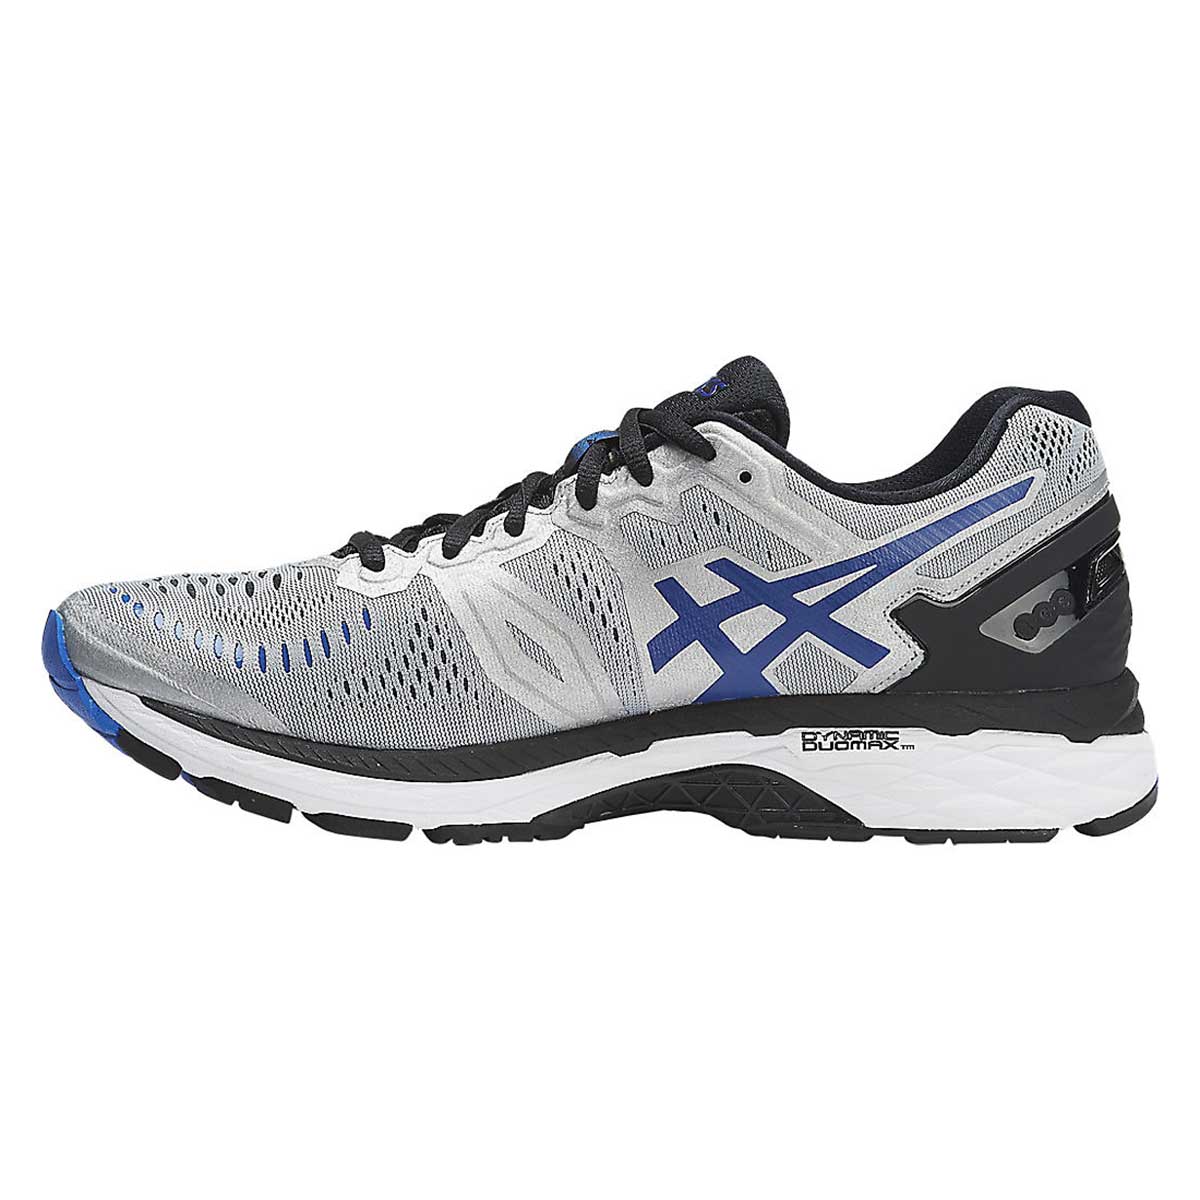 Buy Asics Gel-Kayano 23 (2E) Running Shoes (Silver/Imperial) Online